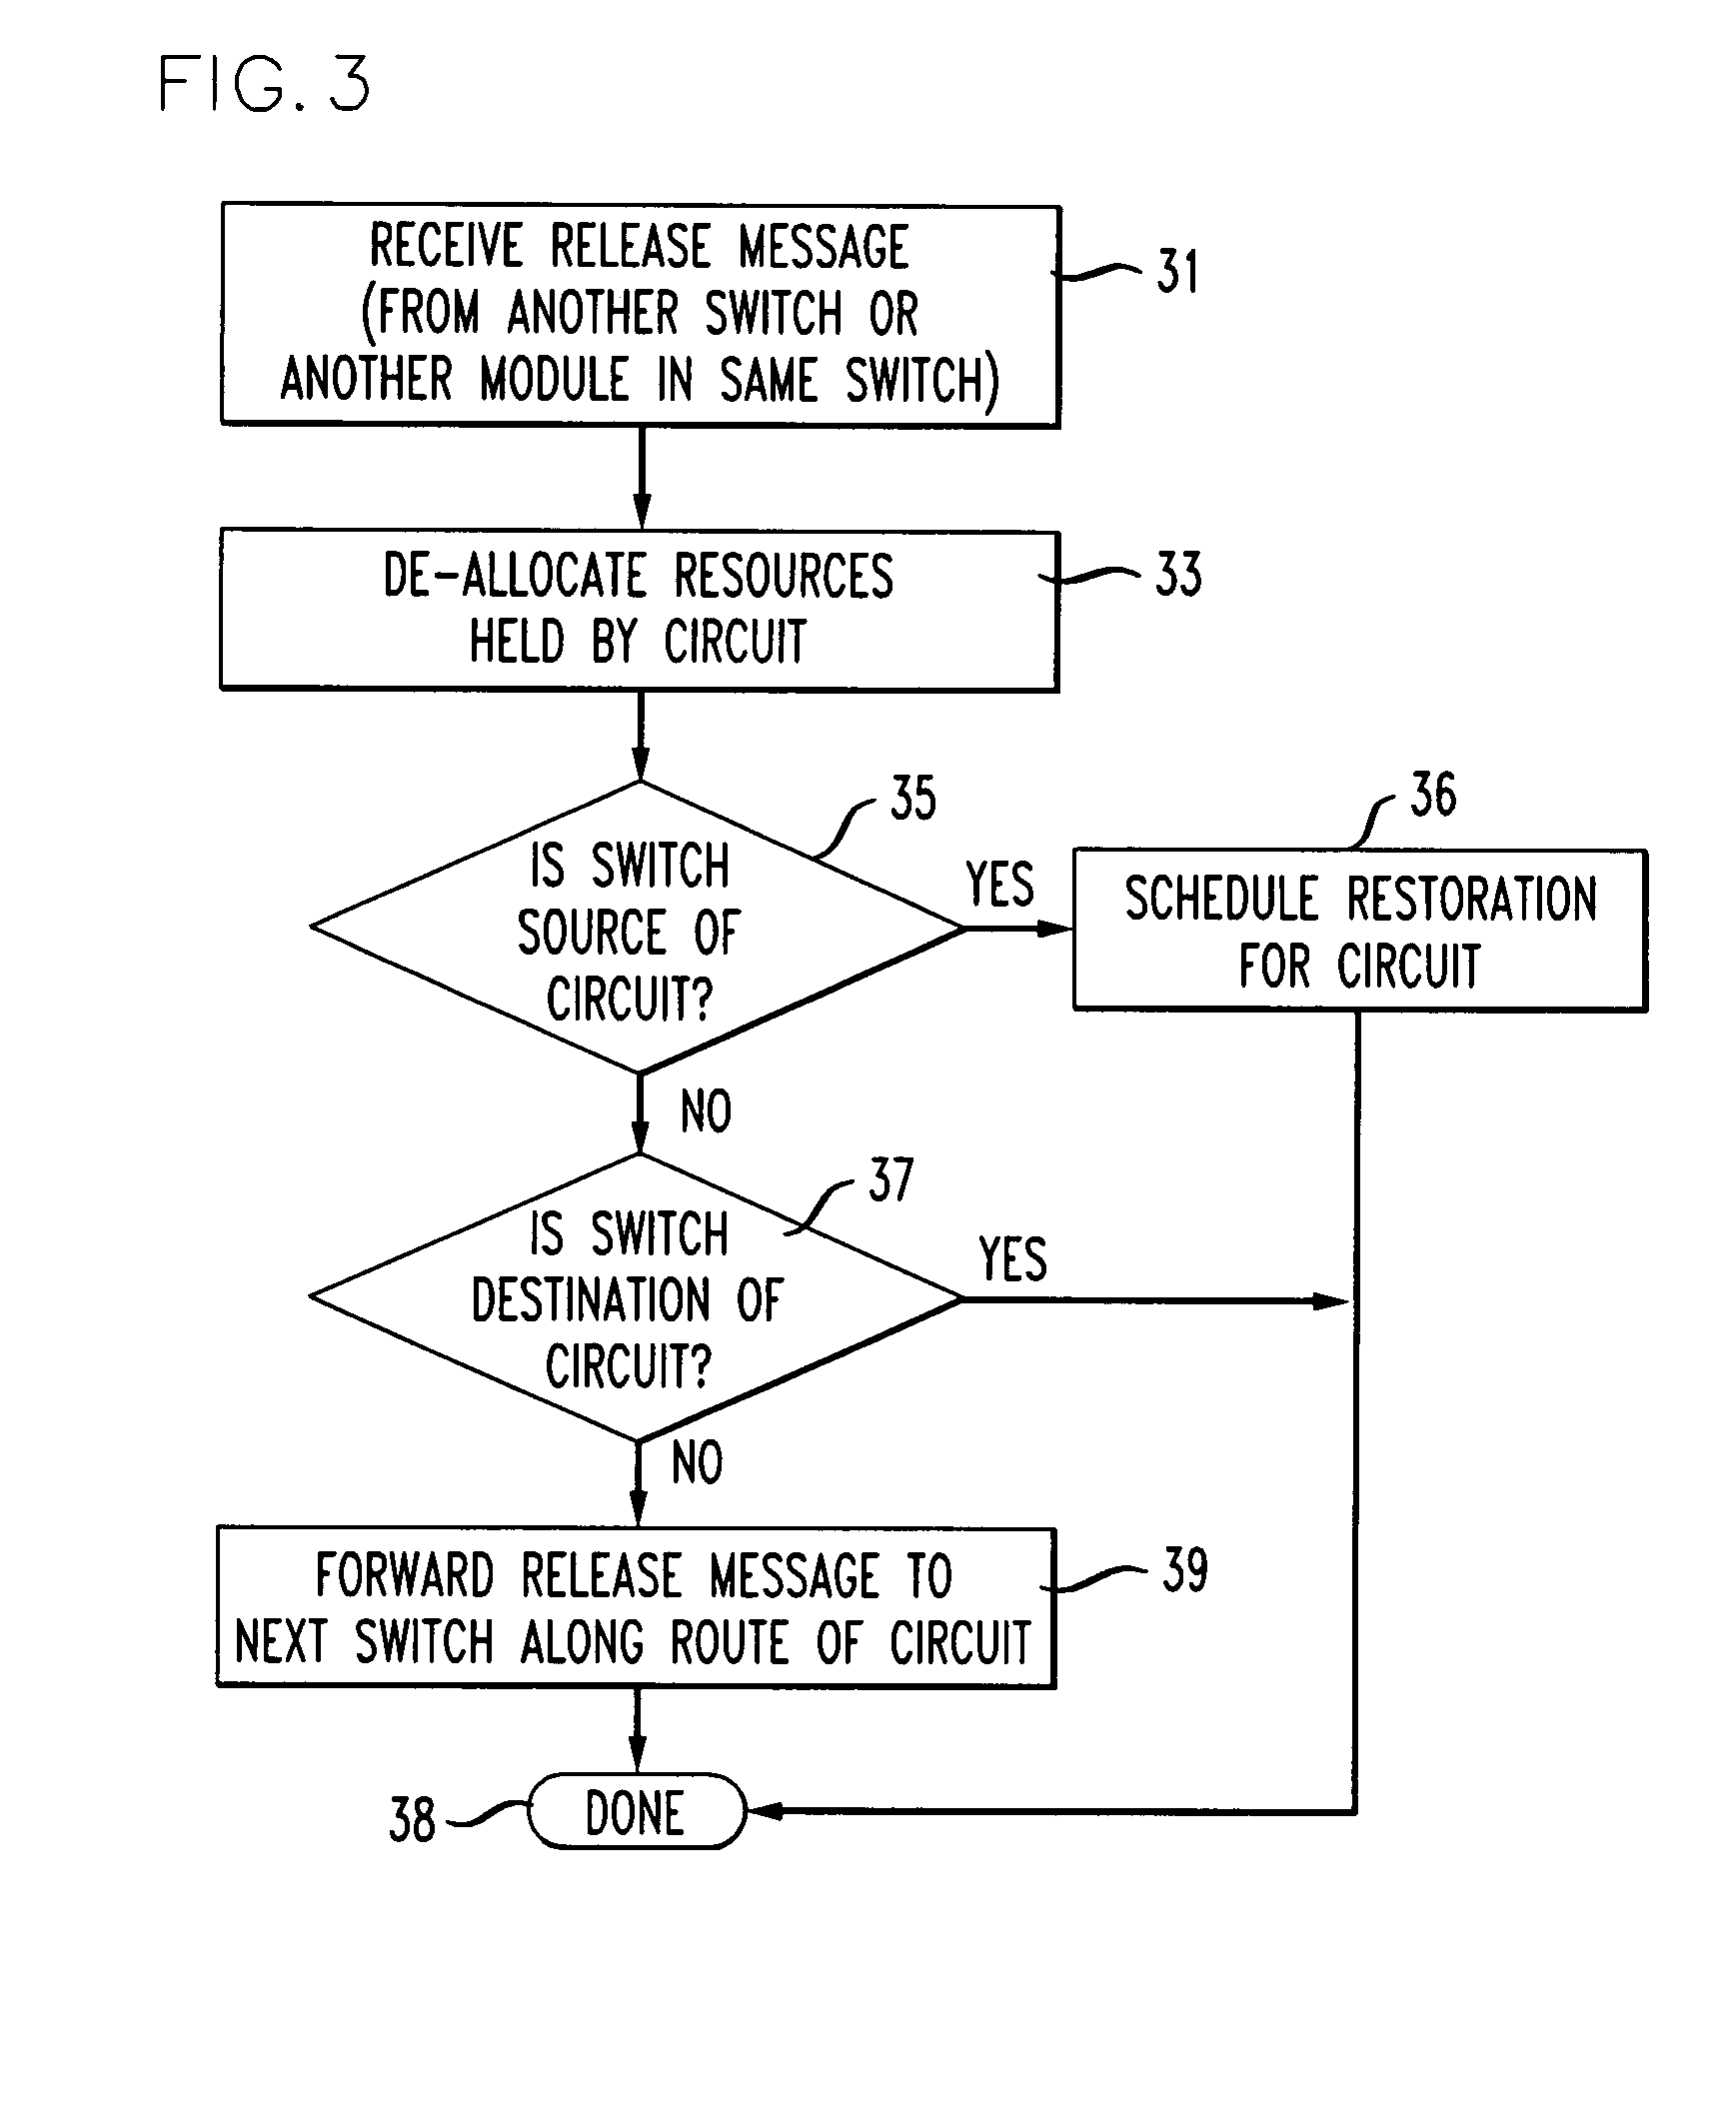 Method and apparatus for delaying start of restoration of low priority services